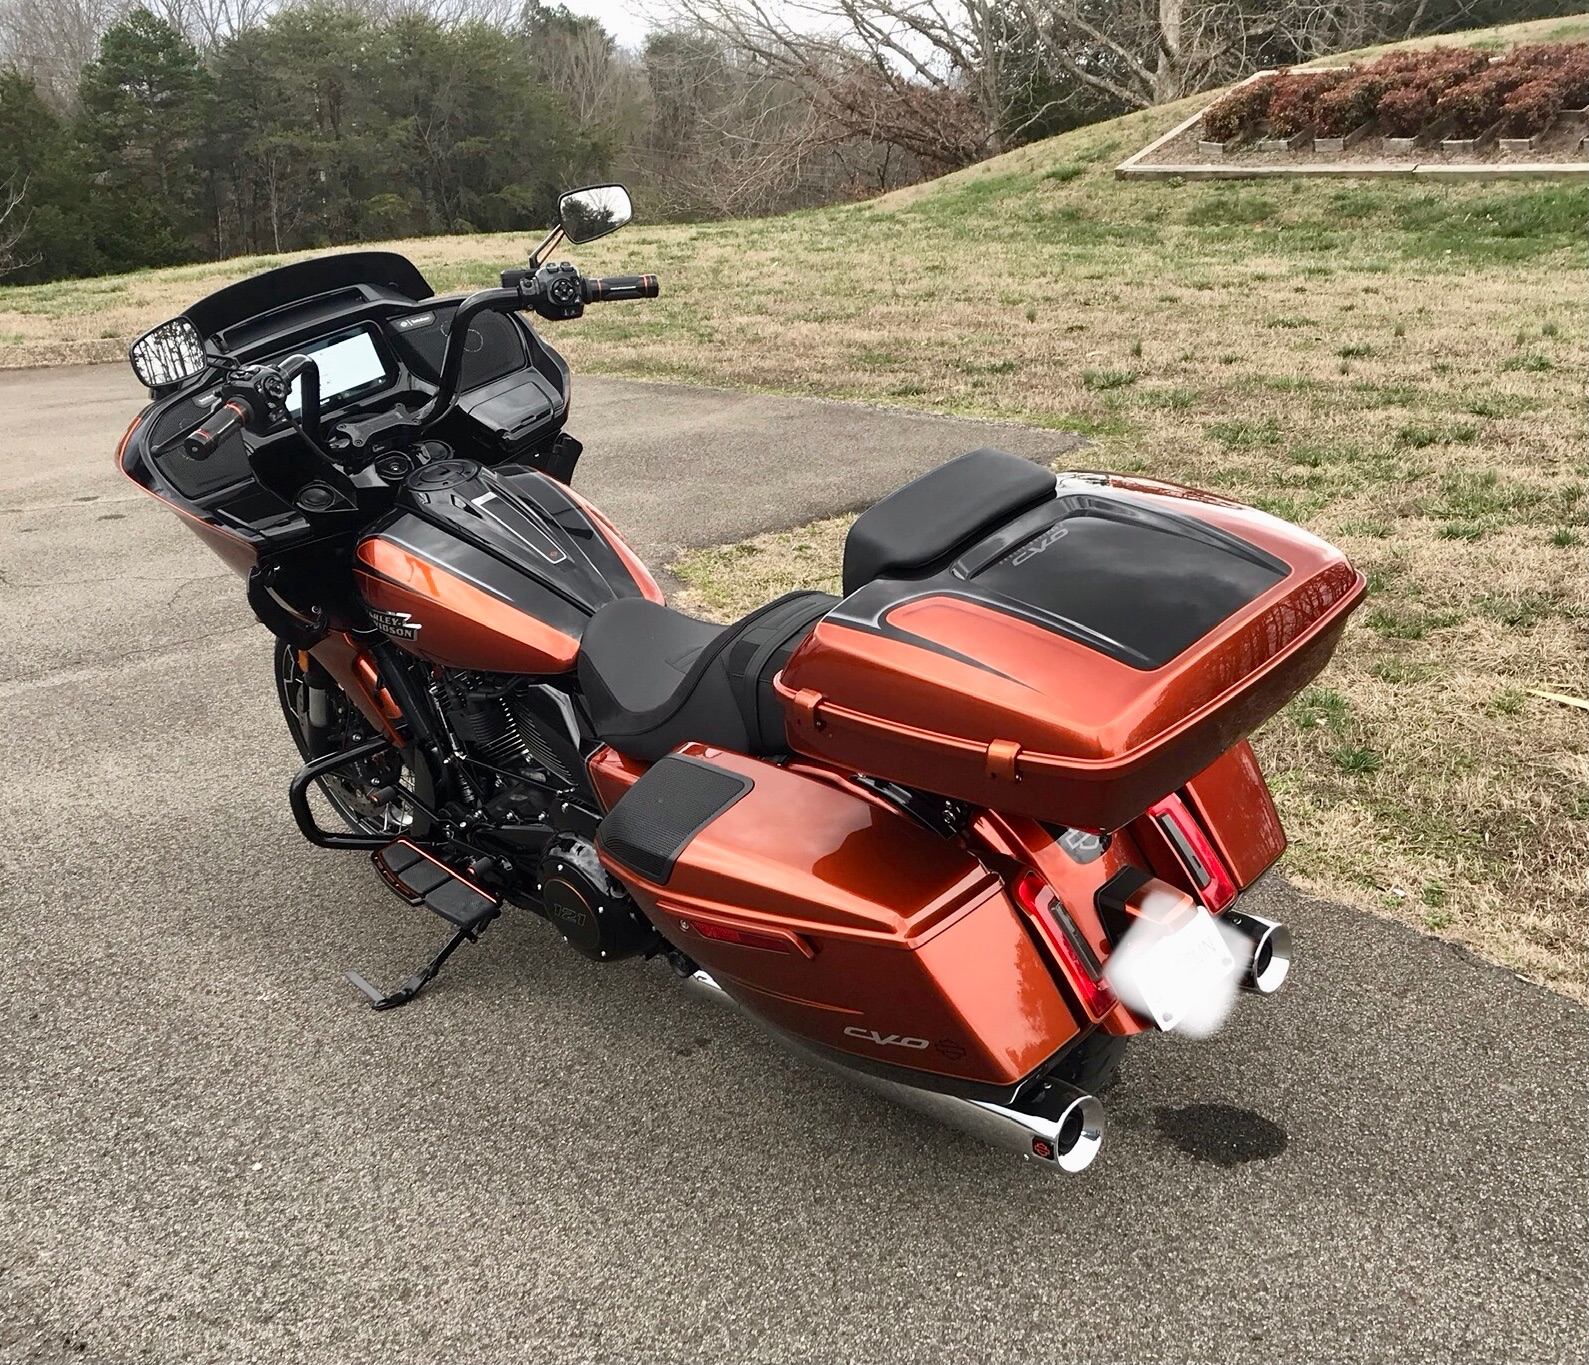 2023 Harley-Davidson CVO™ Road Glide® in Morristown, Tennessee - Photo 2